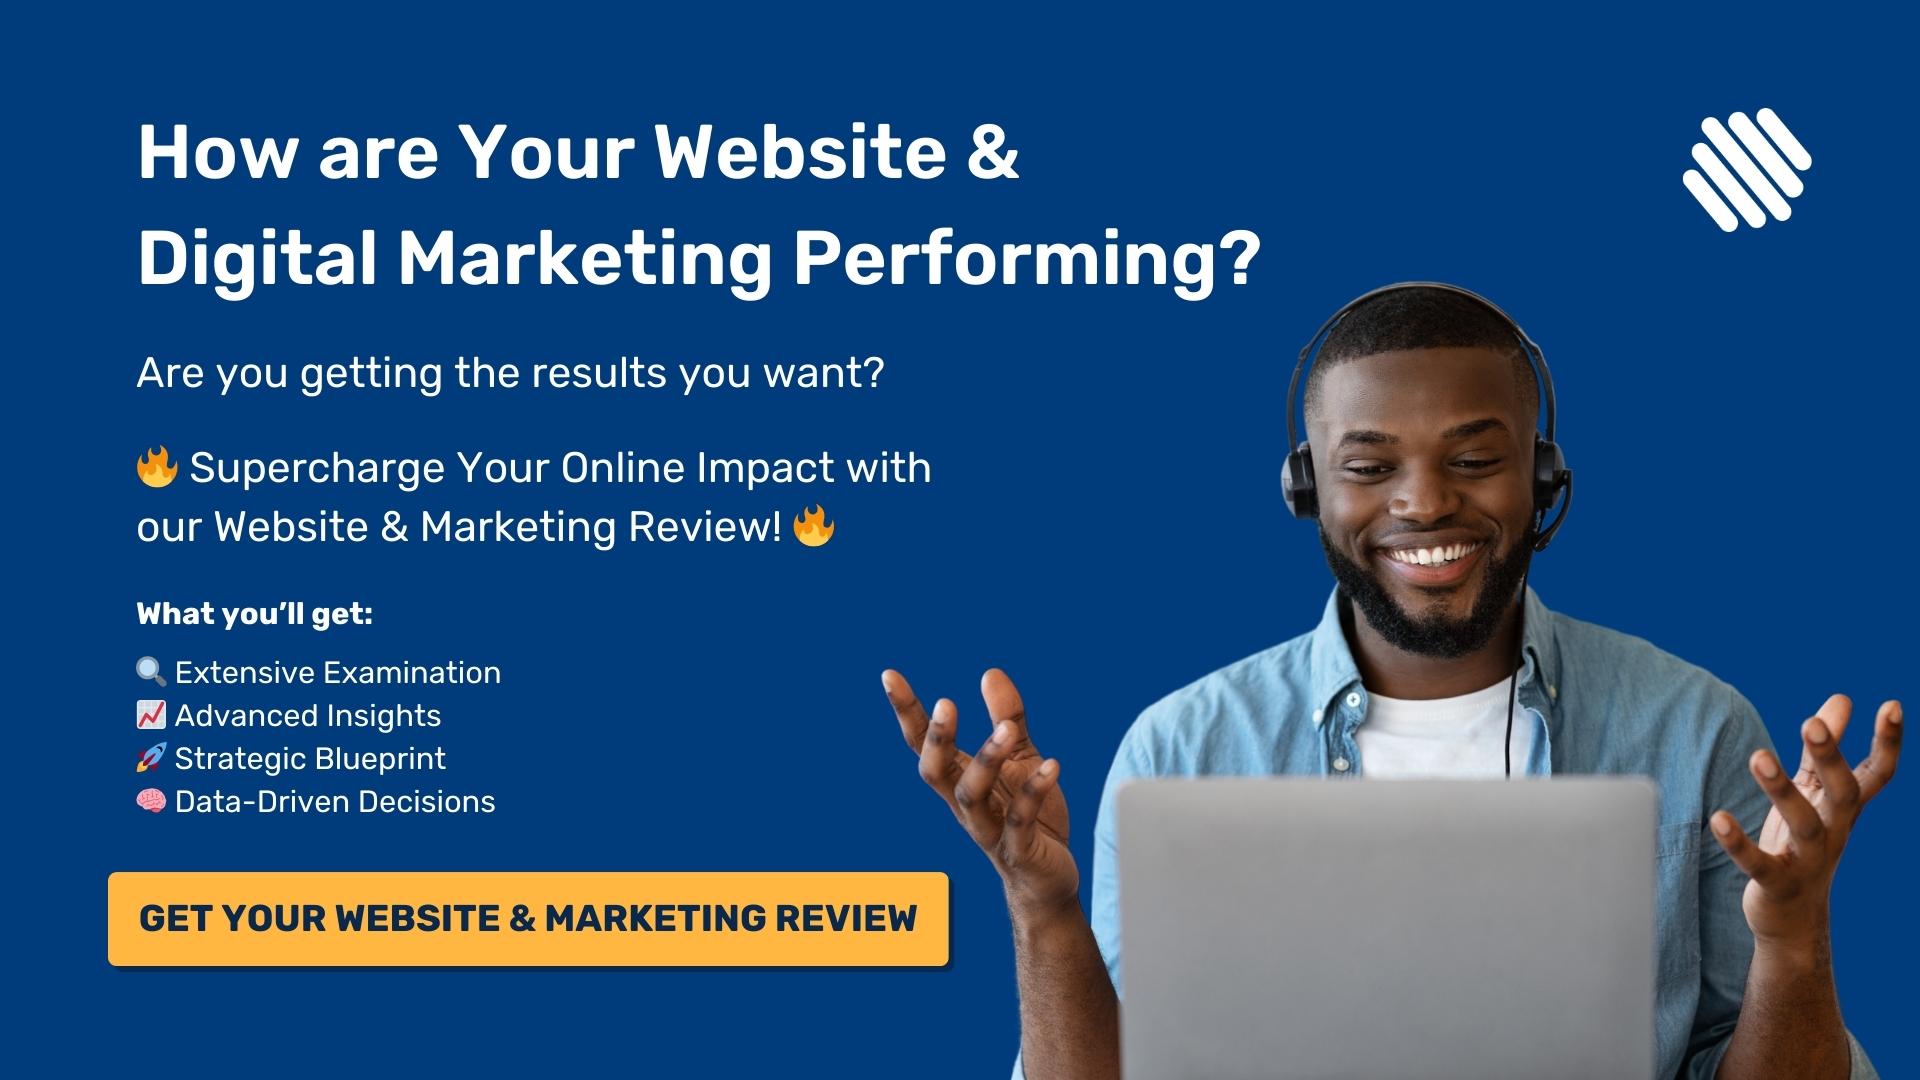 Request a Website and Marketing Review